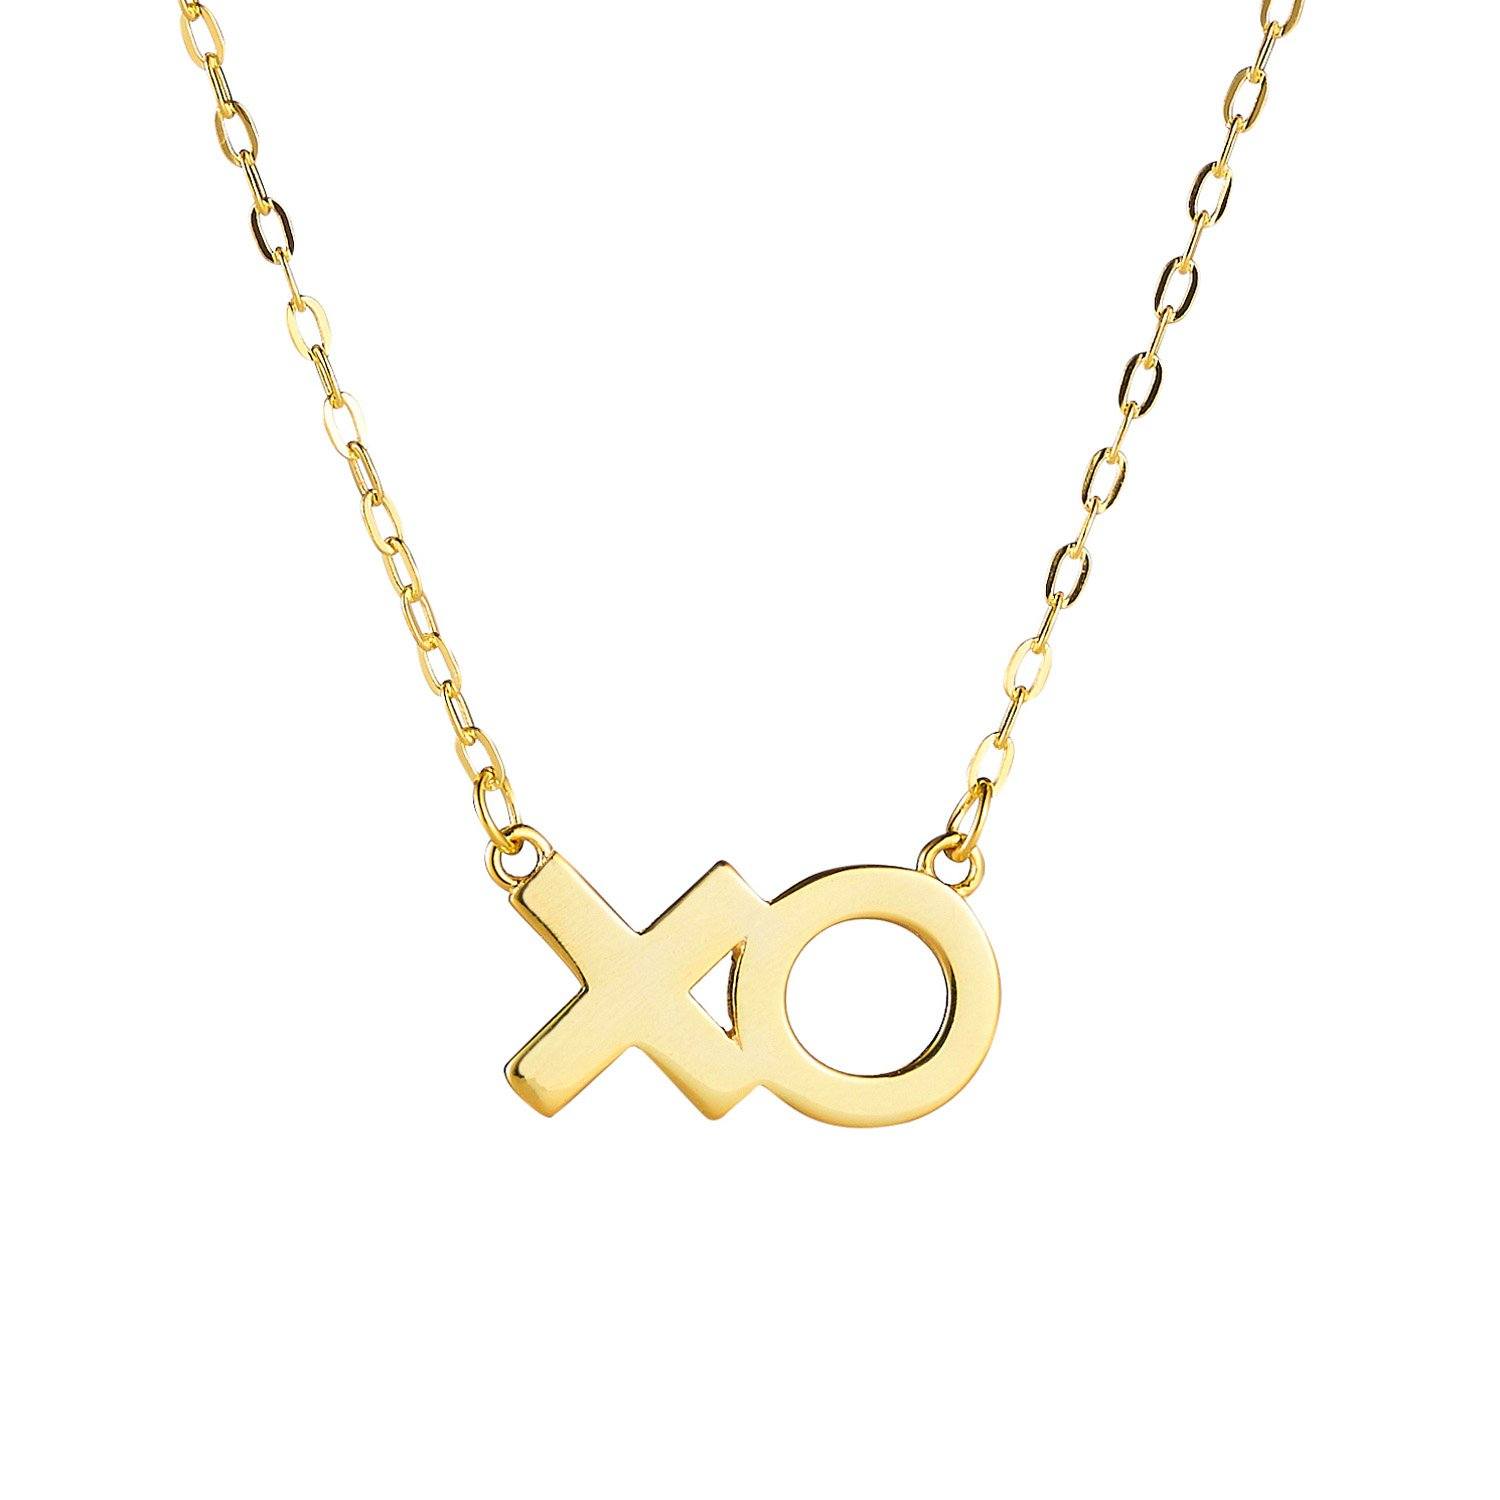 Product image of sterling silver necklace with 14k gold plating that features an 'XO' in text.